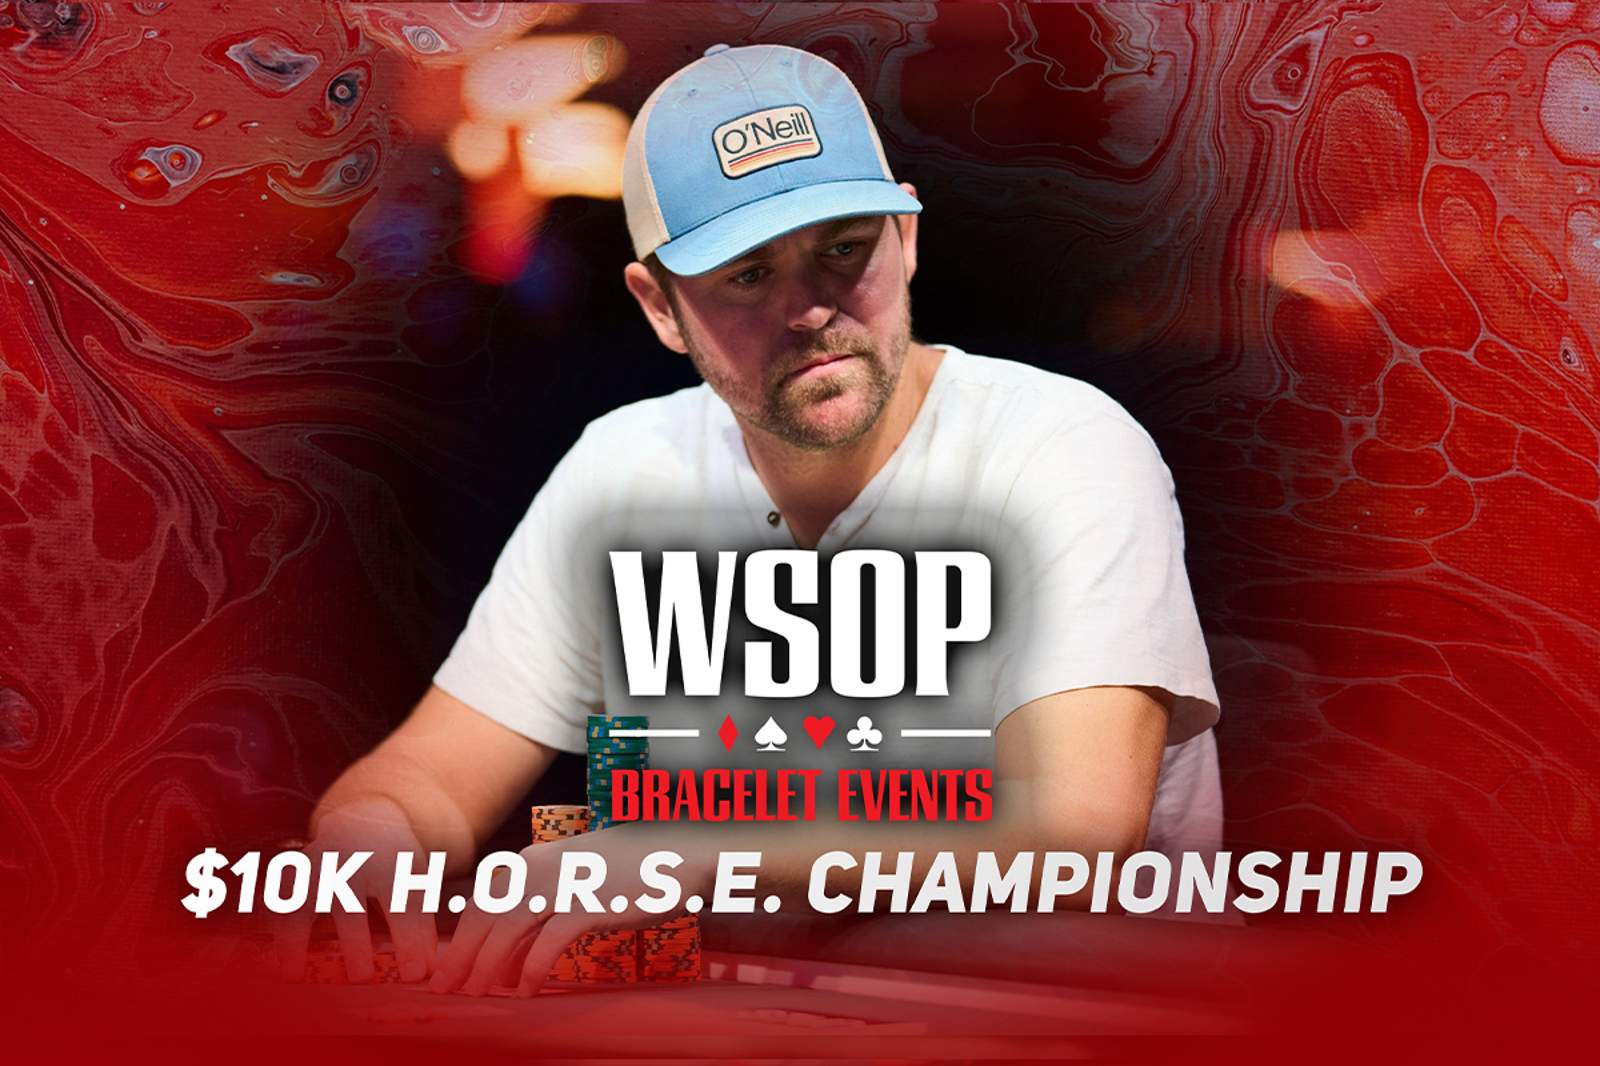 Watch the WSOP Event #40: $10K H.O.R.S.E. Championship Final Table on PokerGO.com at 8 p.m. ET